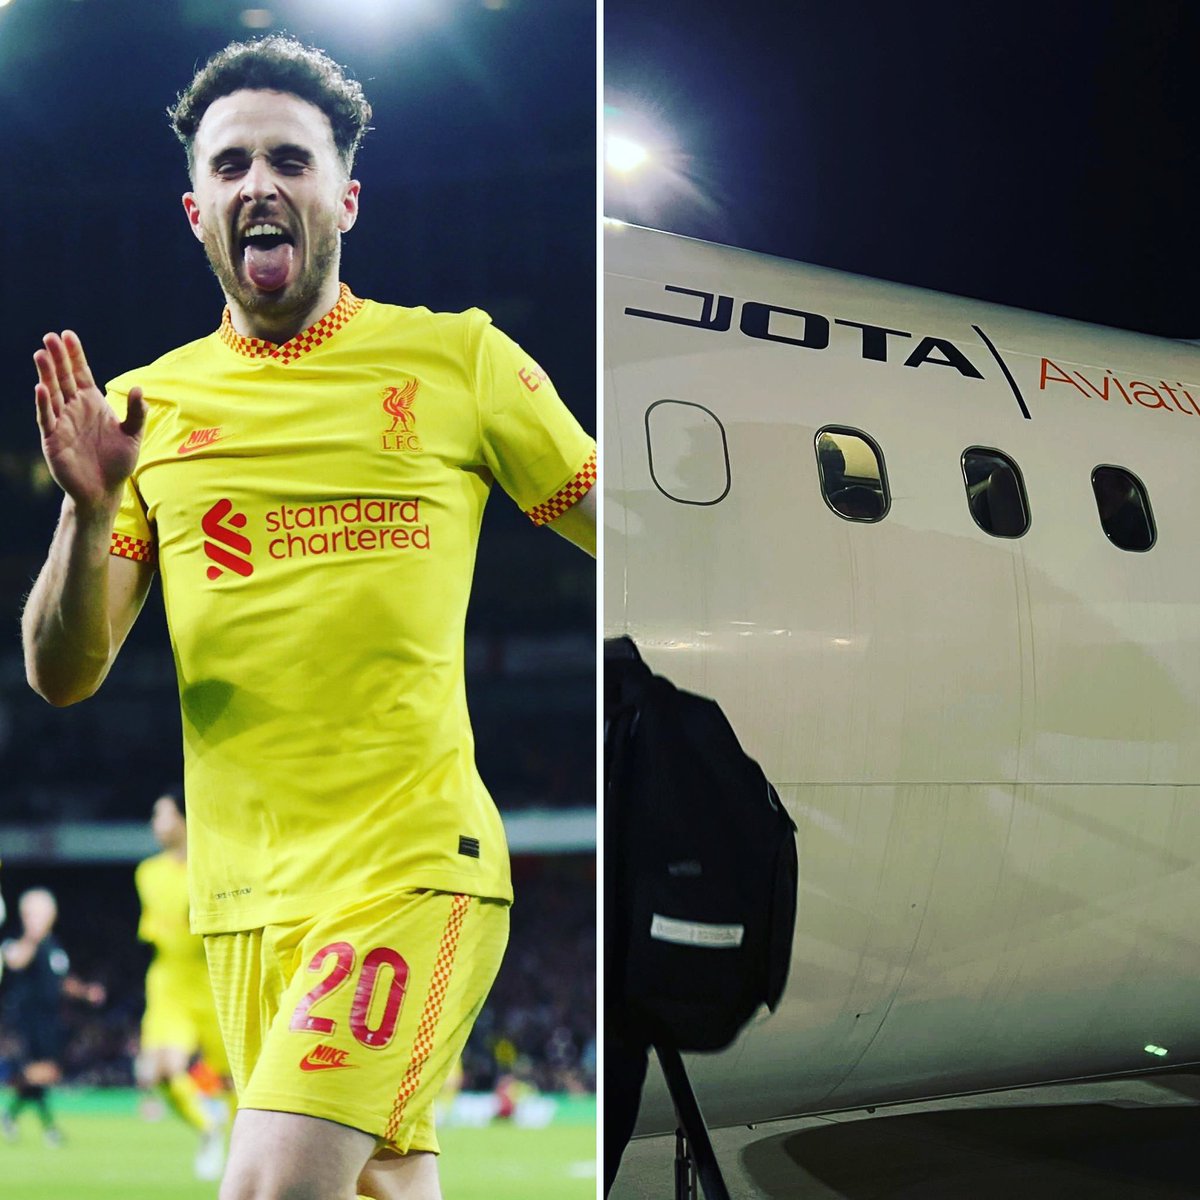 The guy was so good last night, they named the plane after him ✈️ #jotsflying